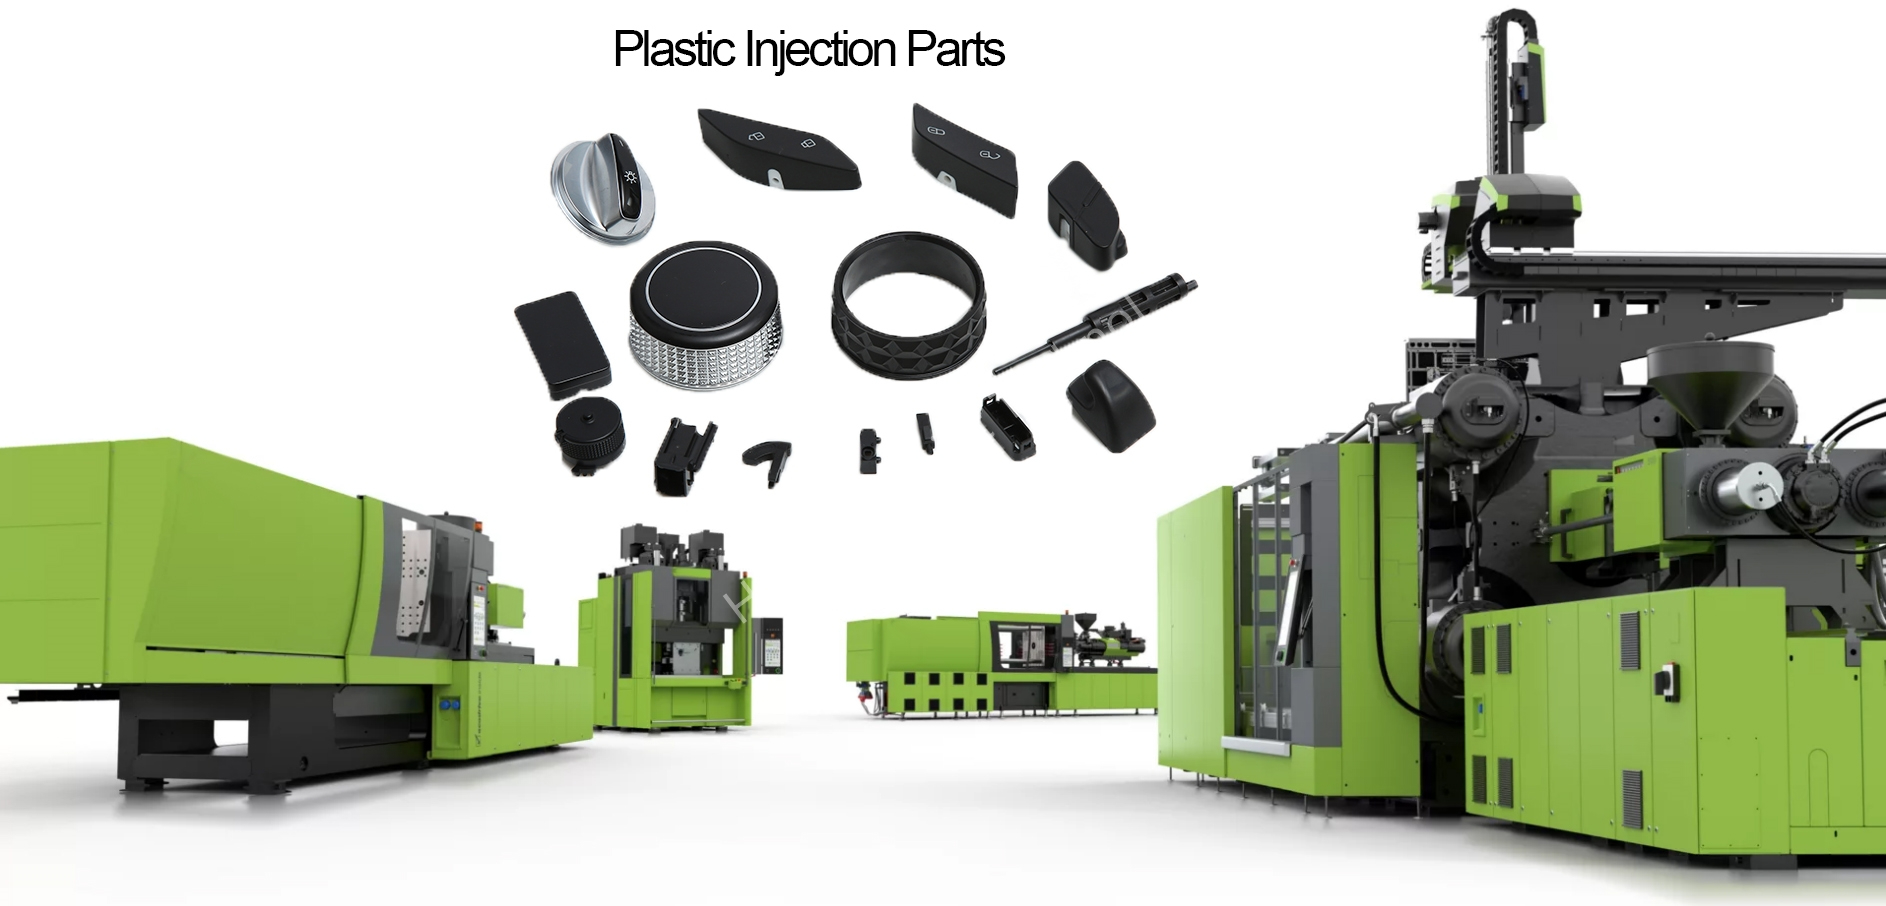 AHST visual counter uses in the injection molding industry